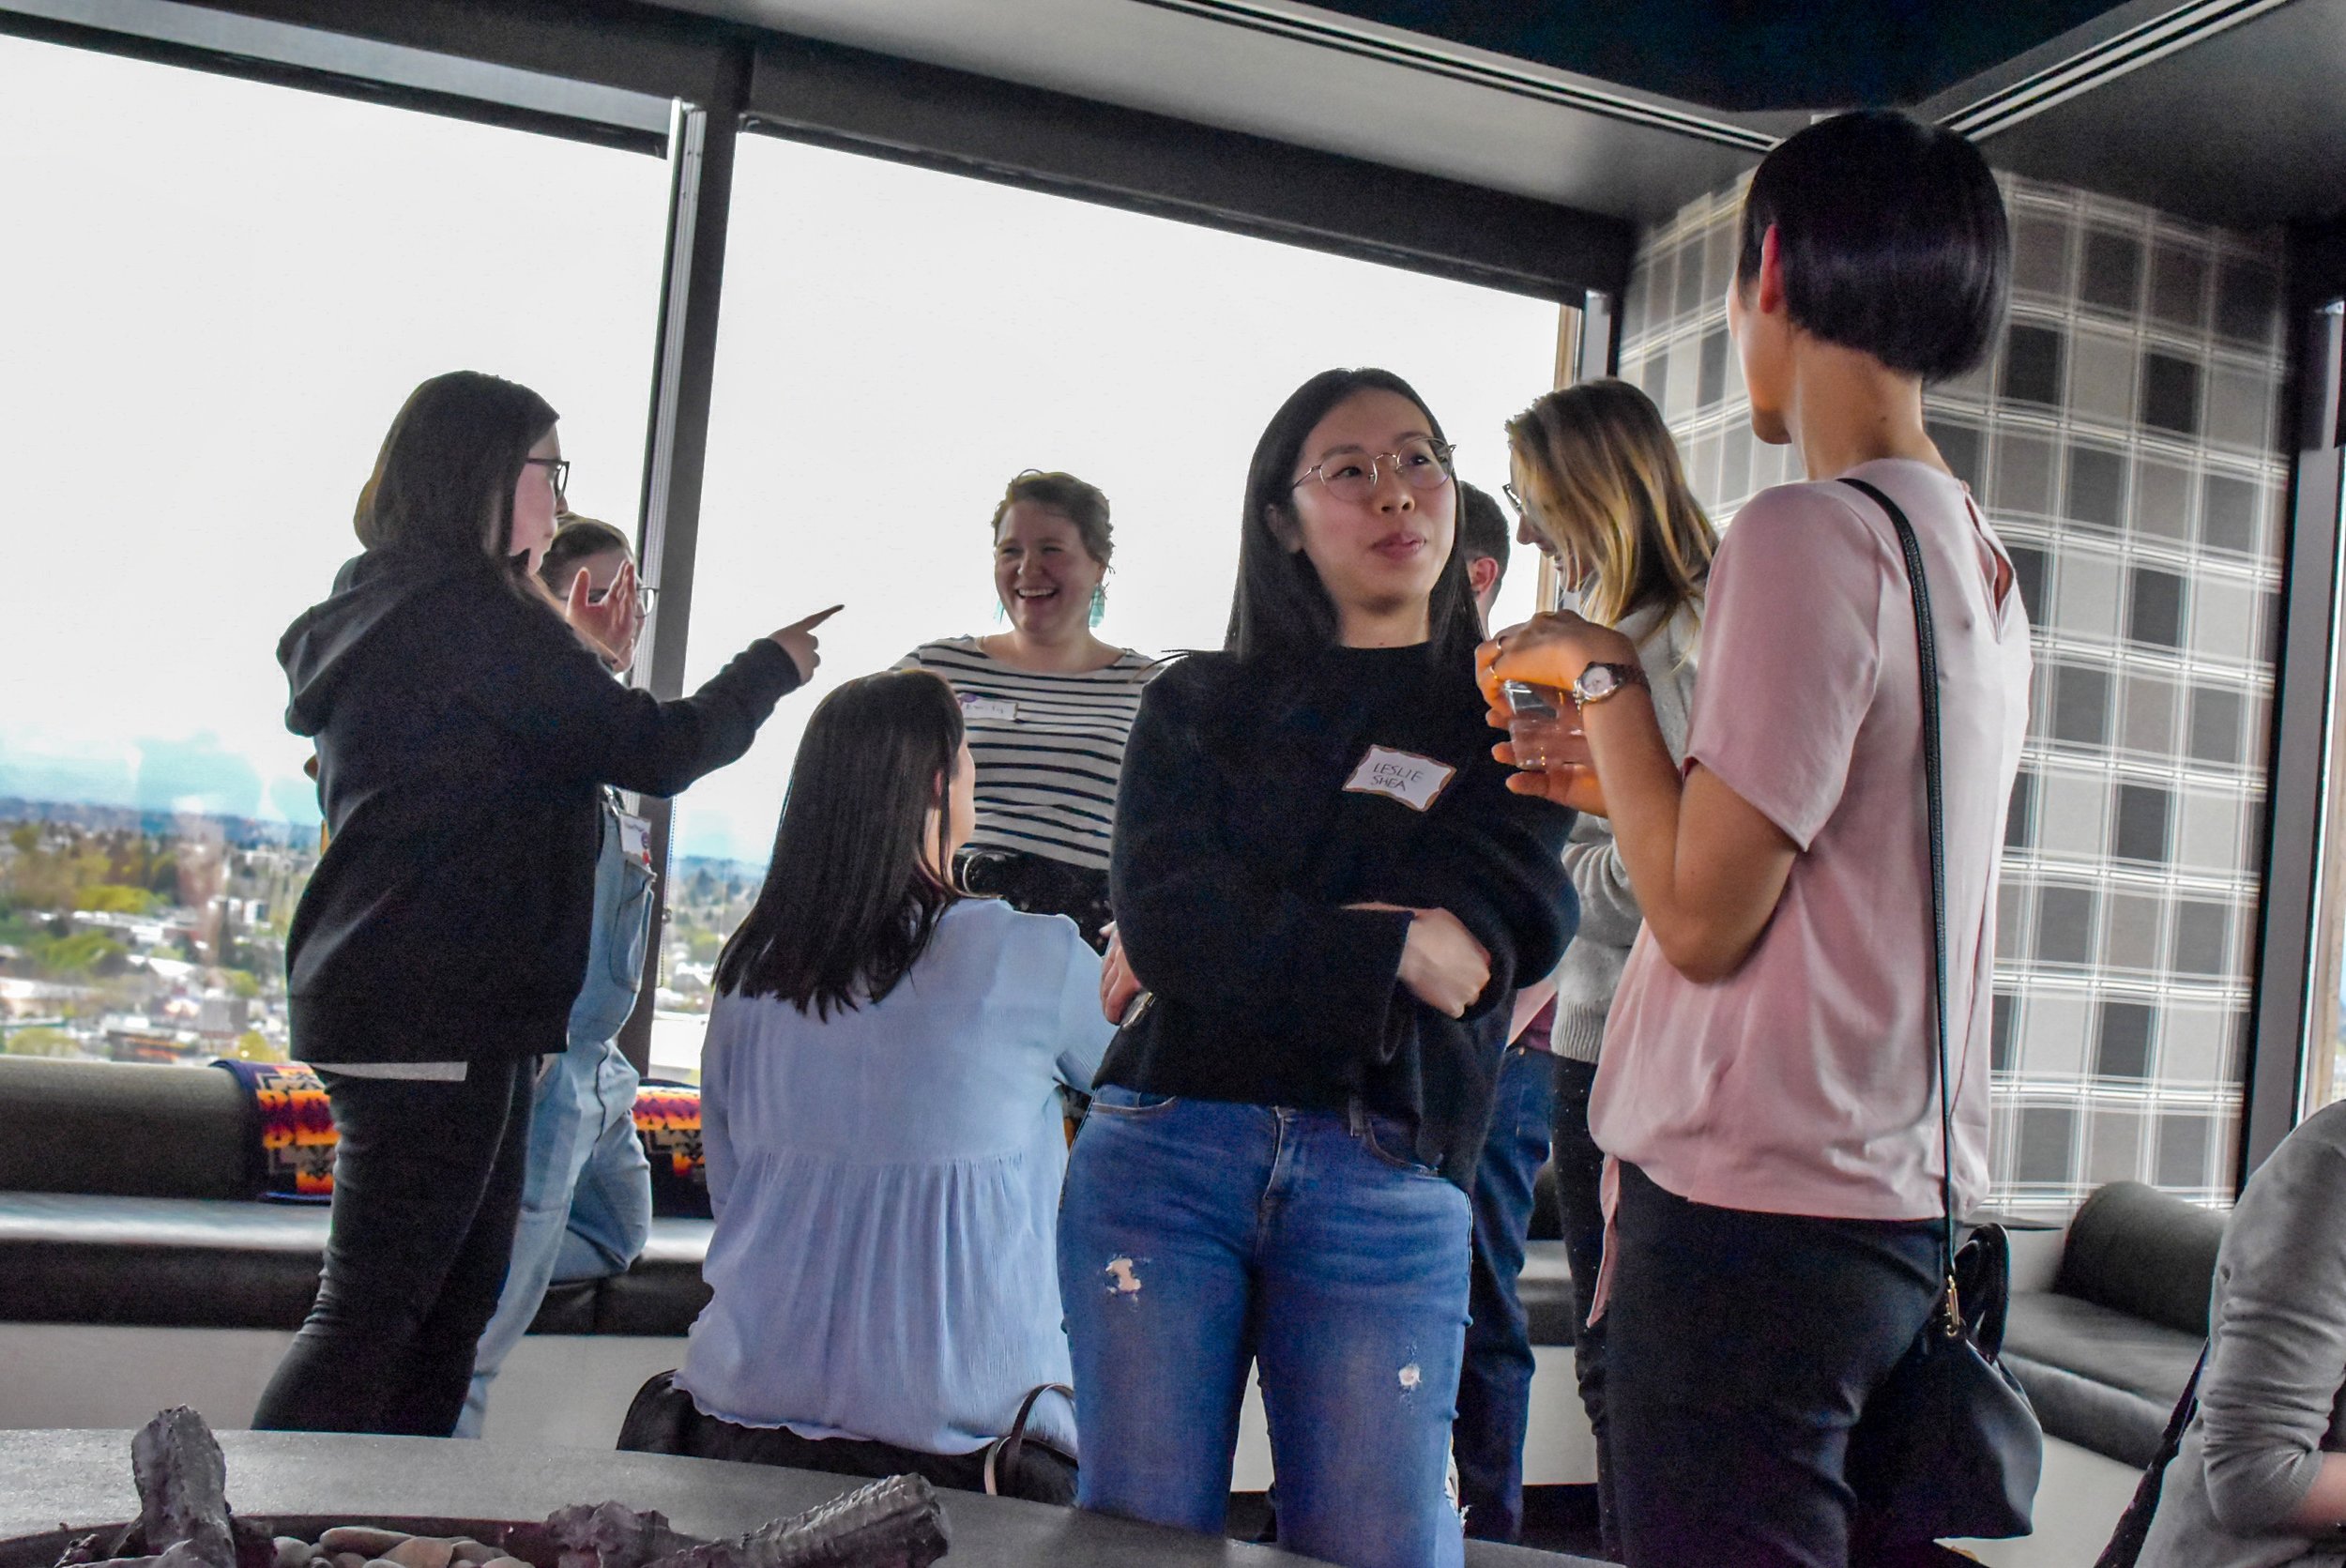 PDXWIT April Happy Hour @ New Relic, 4/16/19, Attendees mingle